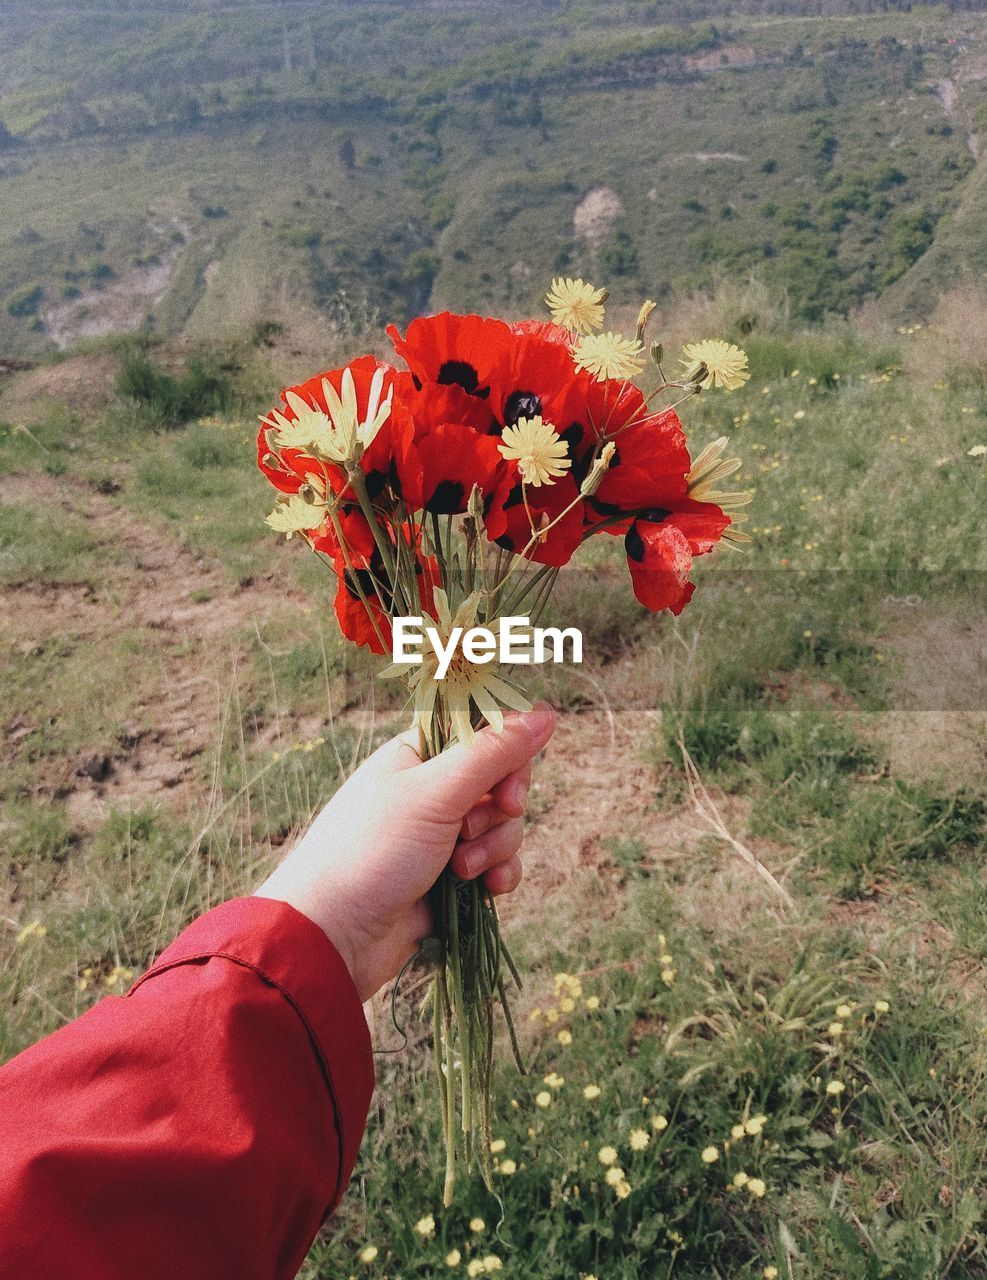 CLOSE-UP OF HAND HOLDING RED FLOWERING PLANT IN FIELD